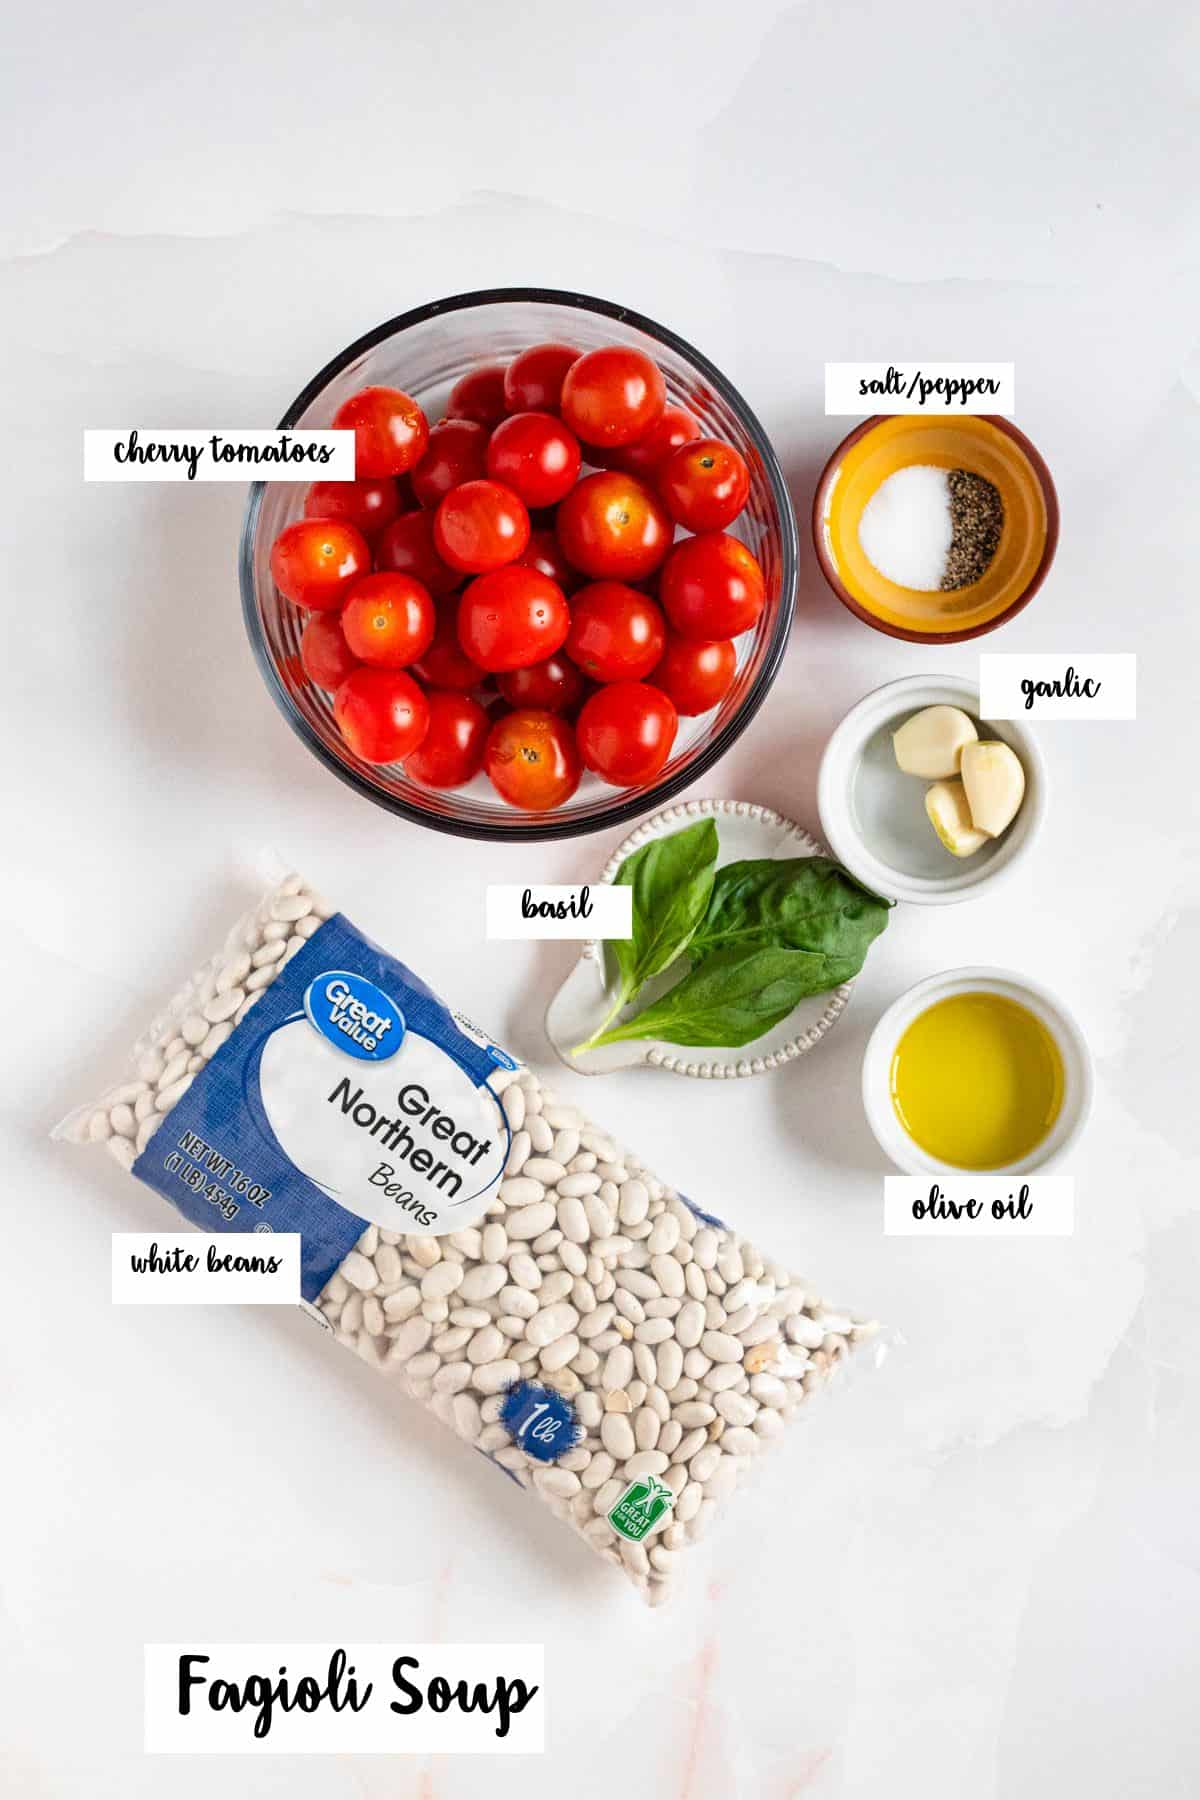 Ingredients shown are used to prepare fagioli soup or white bean soup.